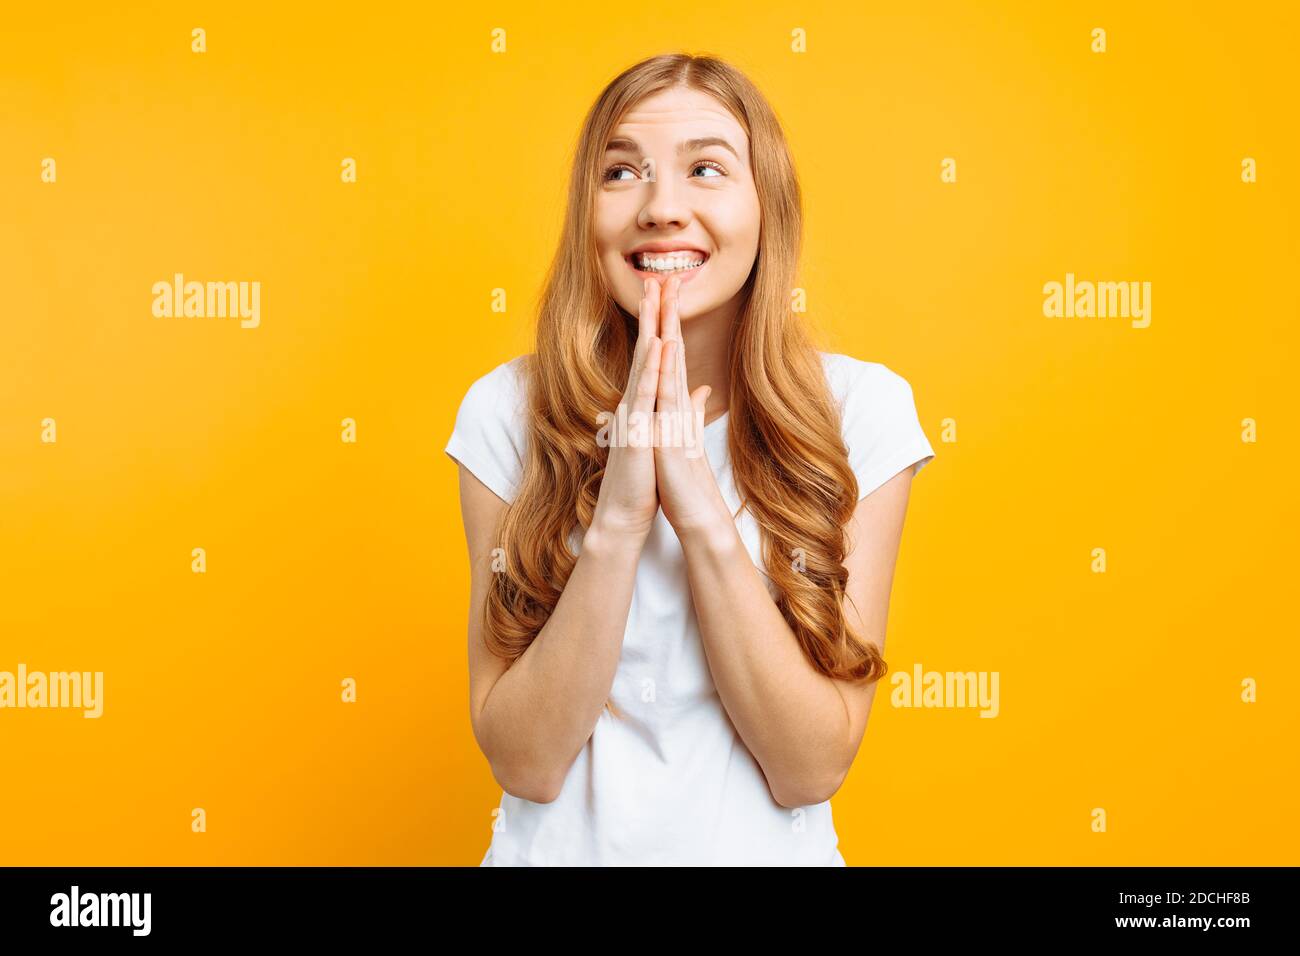 Young focused girl asks God to help her, holding hands near her face, wishes good luck, on a yellow background Stock Photo